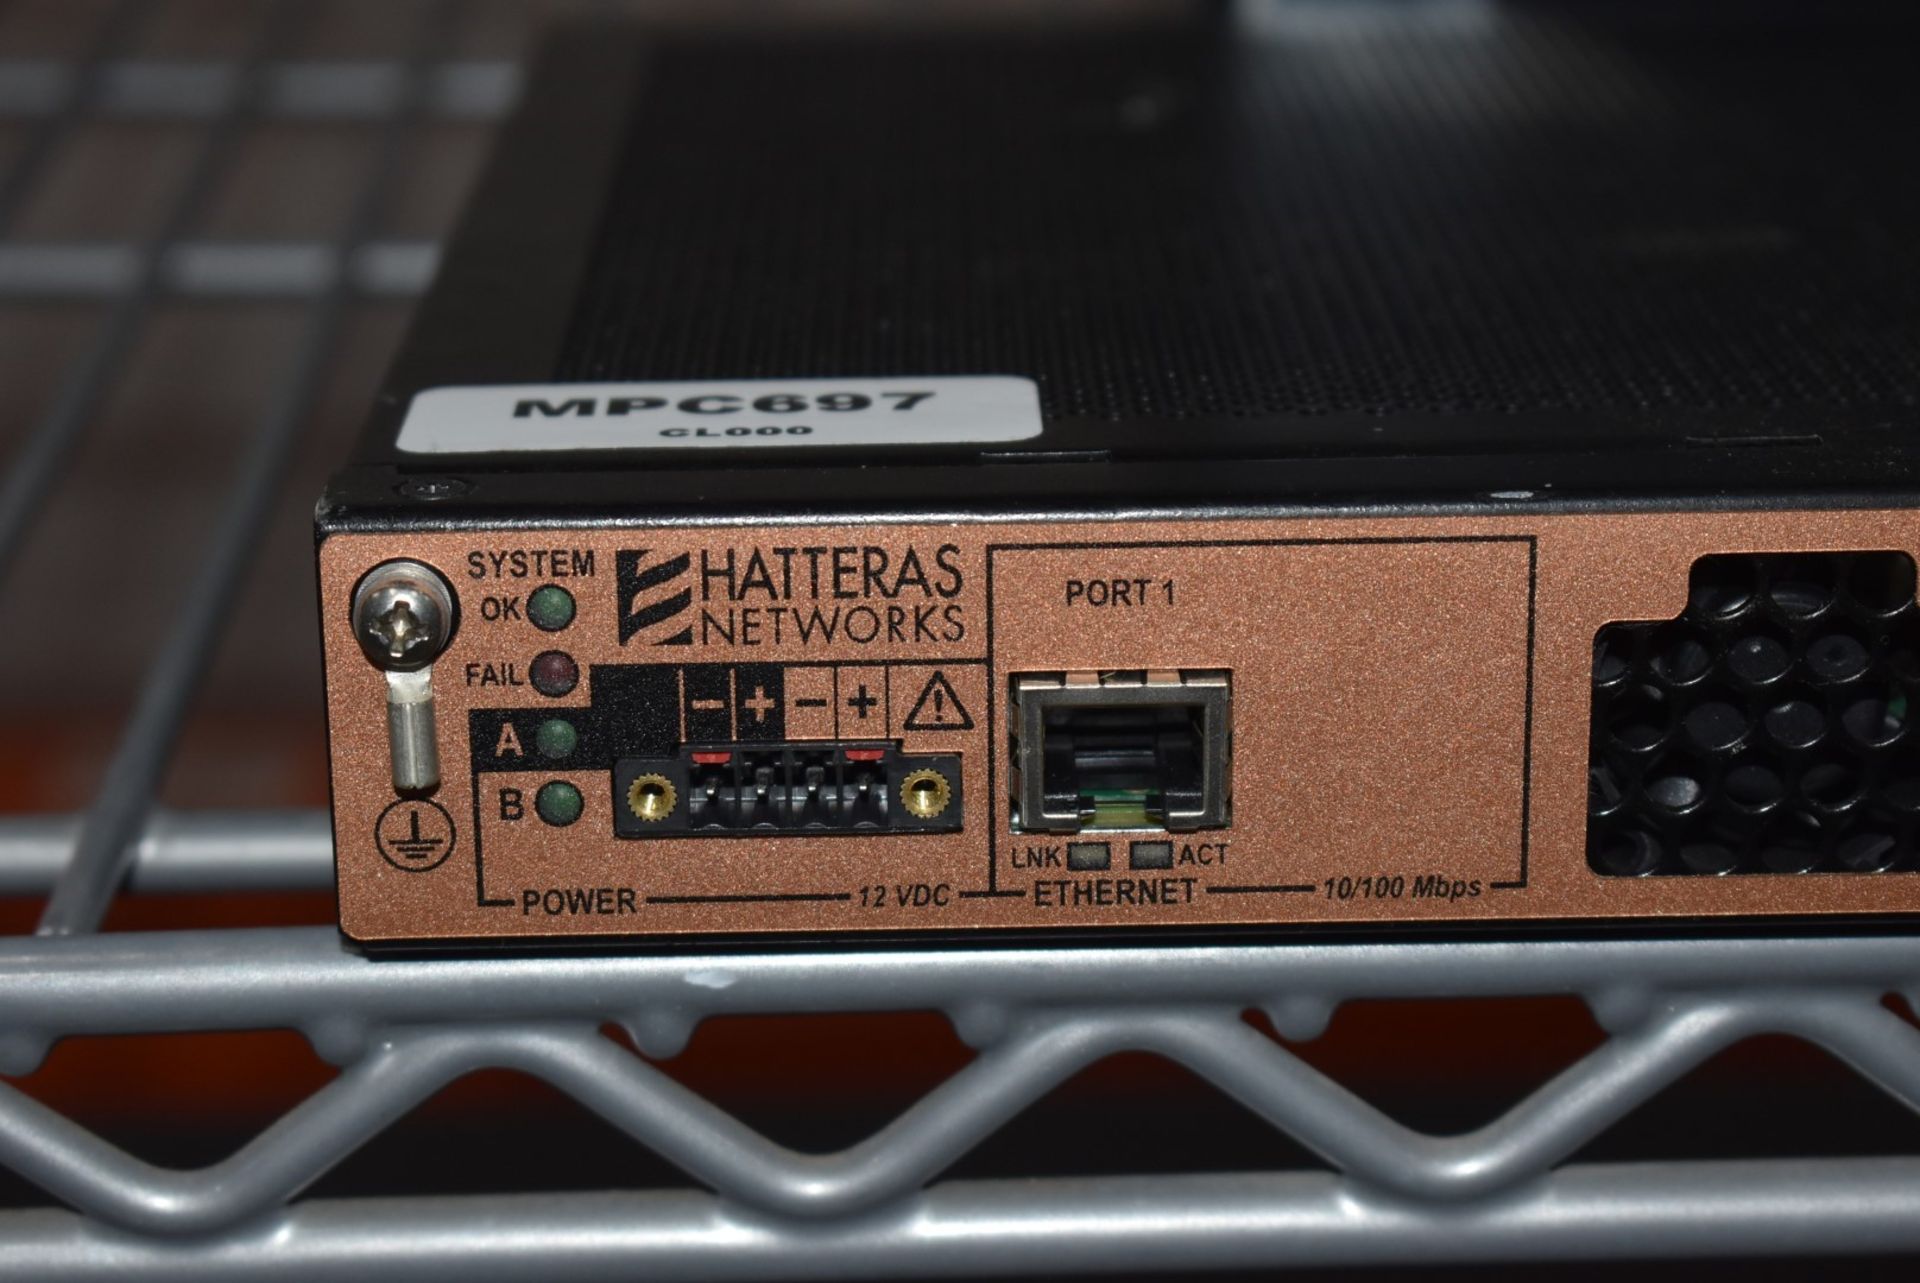 1 x Hatteras Networks HN408-CPi Ethernet Modem - Ref: MPC697 WH3 - CL011 - Location: Altrincham - Image 5 of 5